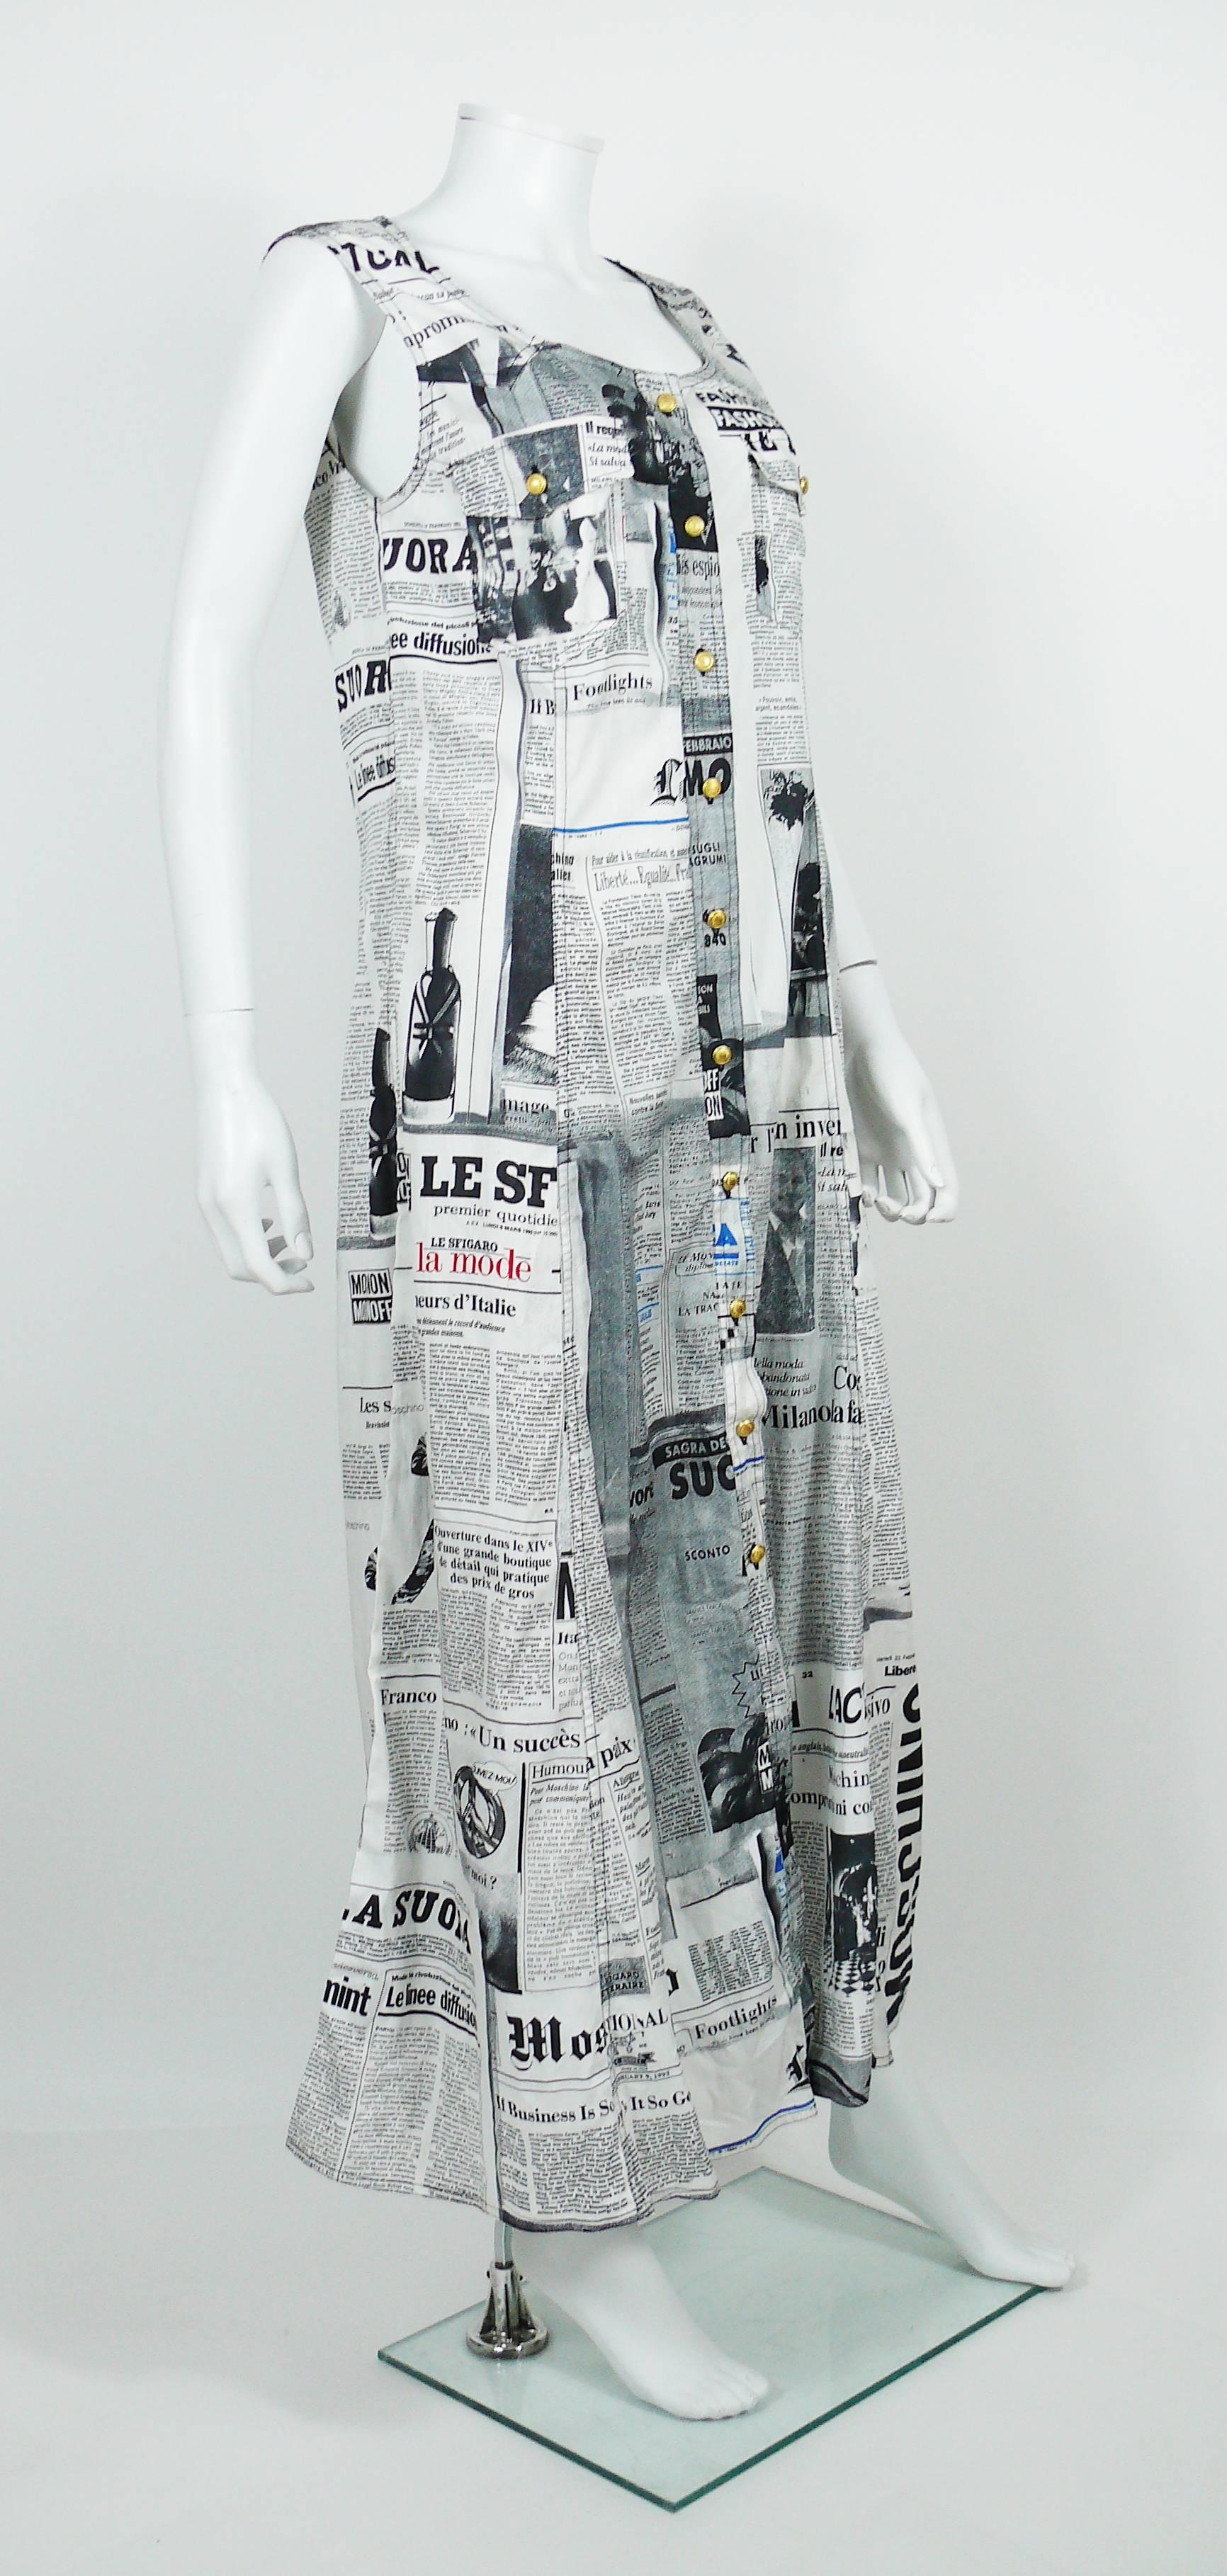 MOSCHINO vintage iconic newspaper print full length button up dress.

This dress features :
- Newspaper print design with MOSCHINO print spell outs all over
- FRANCO MOSCHINO portraits
- Two chest pockets
- Gold toned signature MOSCHINO JEANS